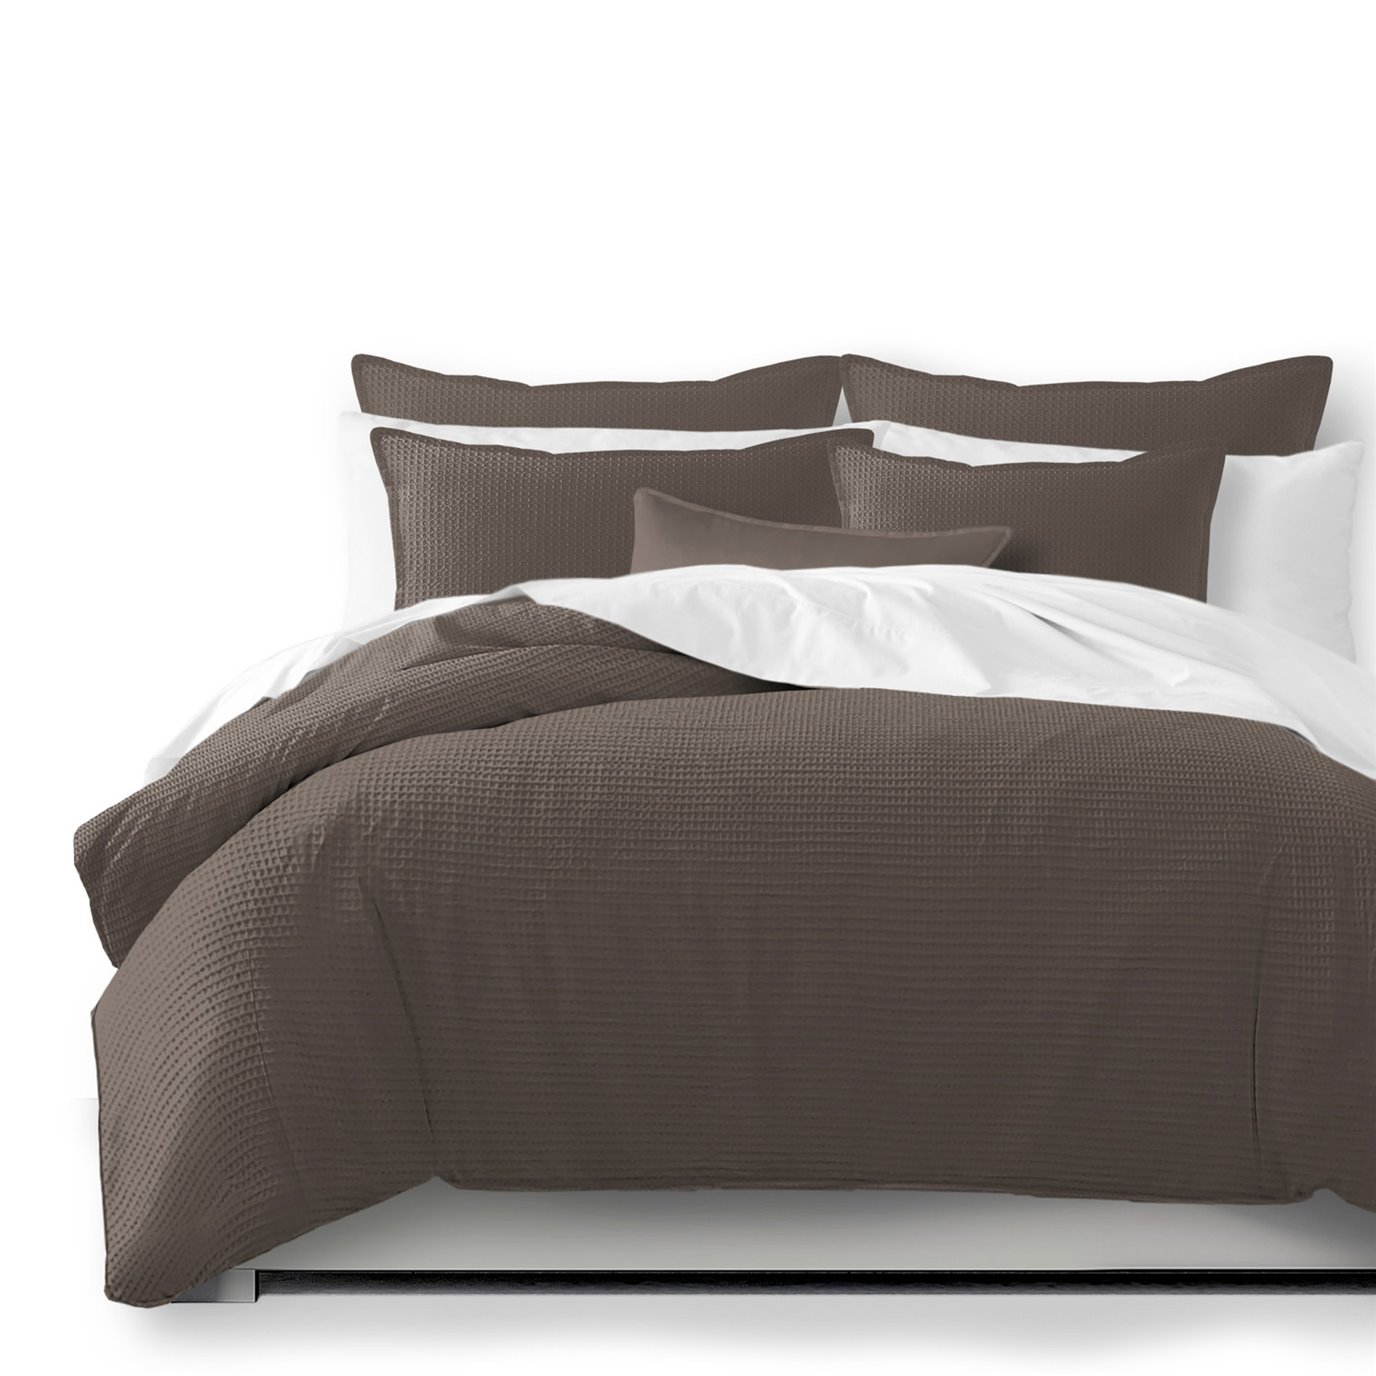 Classic Waffle Mocca Duvet Cover and Pillow Sham(s) Set - Size Super King